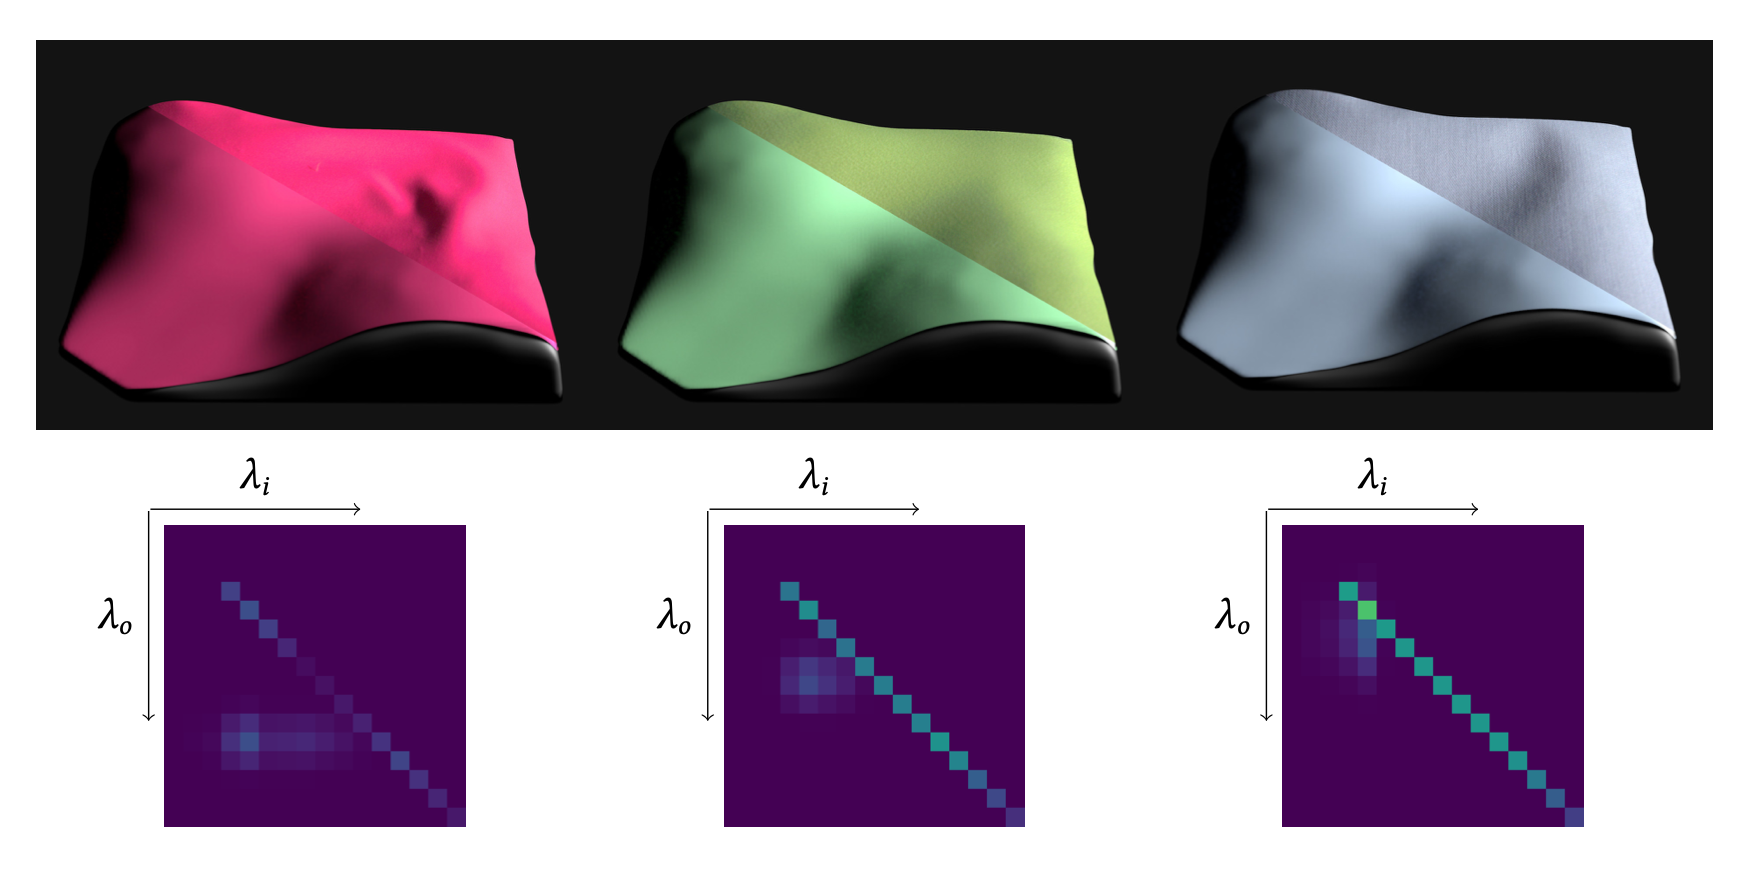 Three fluorescent fabrics under a consumer D65-like LED illumination. Be- neath each image is the corresponding spectral re-radiance matrix that has been estimated using the method presented in this thesis. The upper-right half of each image shows a photograph of the actual fabric under D65-like LED illumination. The lower-left half of each image shows a rendered image of a Lambertian surface simulated using these re-radiance matrices to determine the fluorescent response to a light source with a similar illumination spectrum.